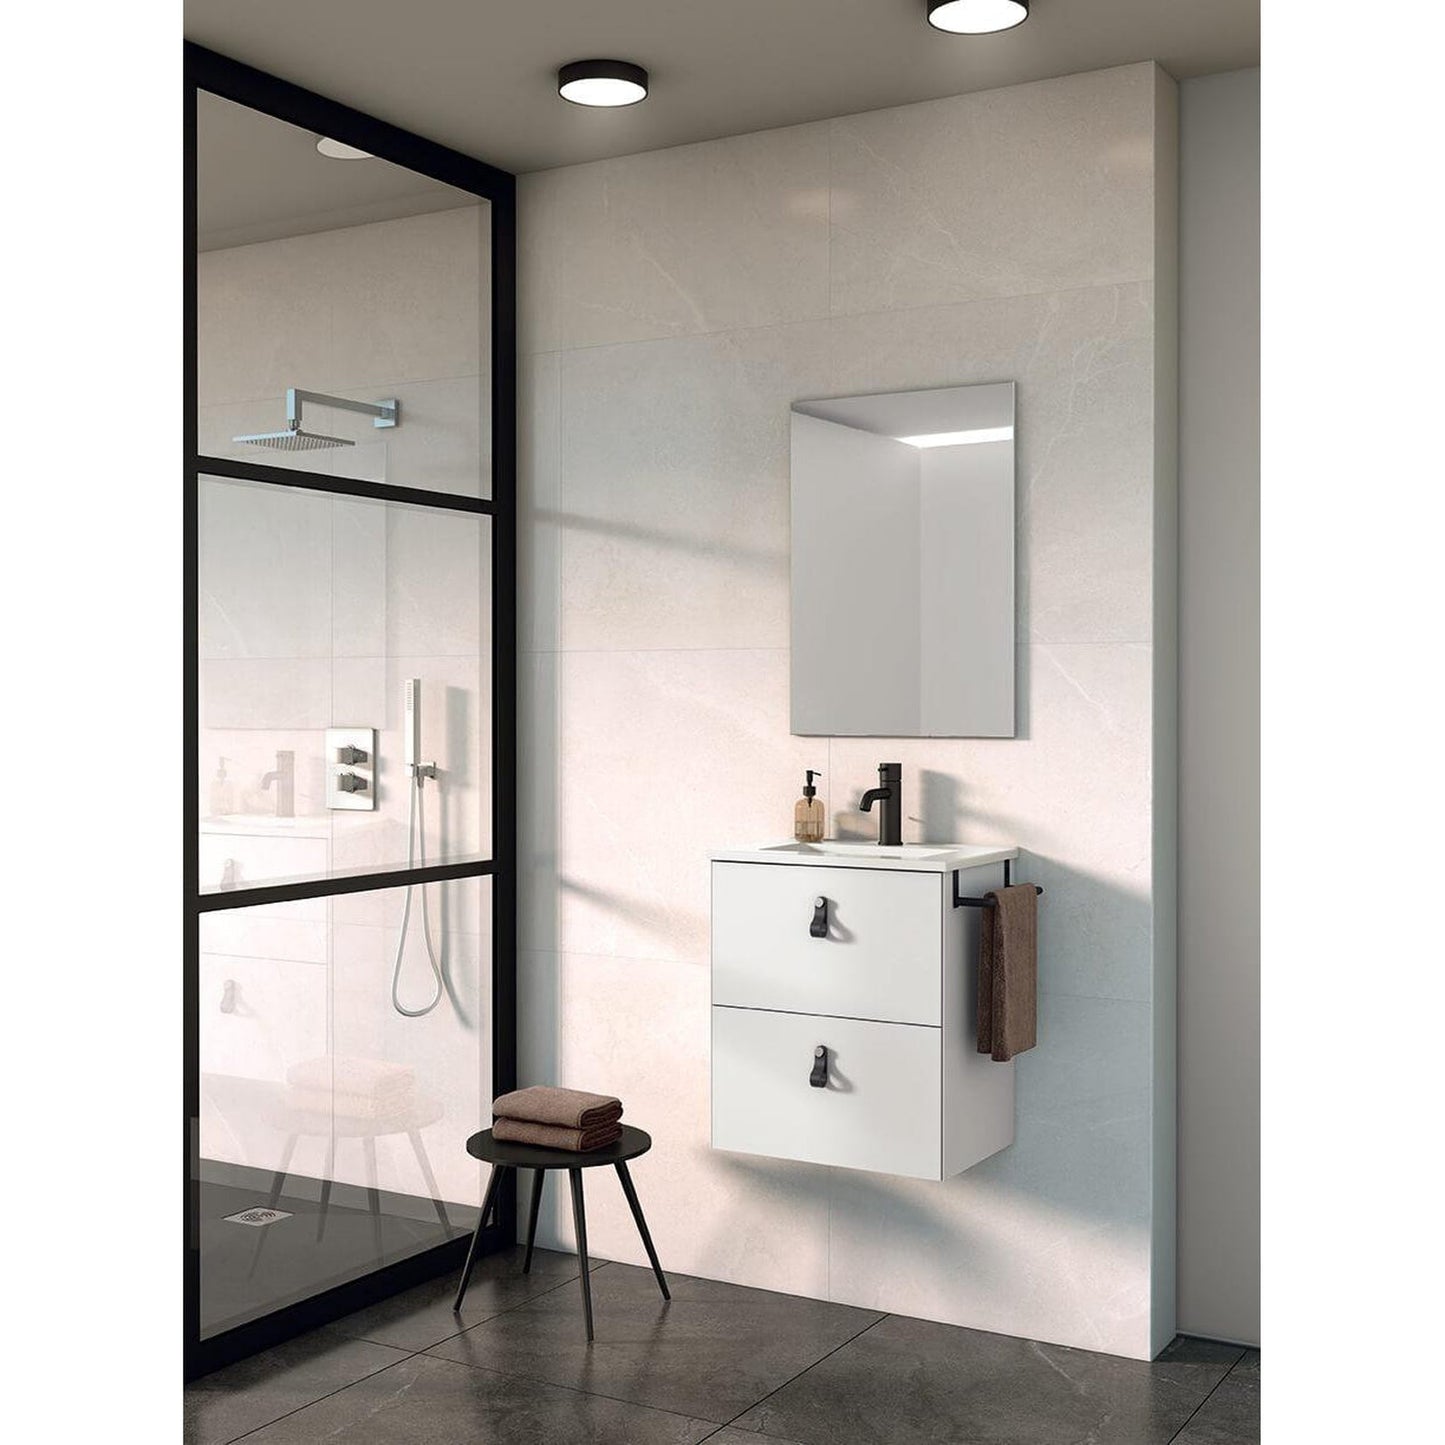 Royo Little 20" x 14" Matte White Modern Wall-mounted Vanity With 2 Drawers